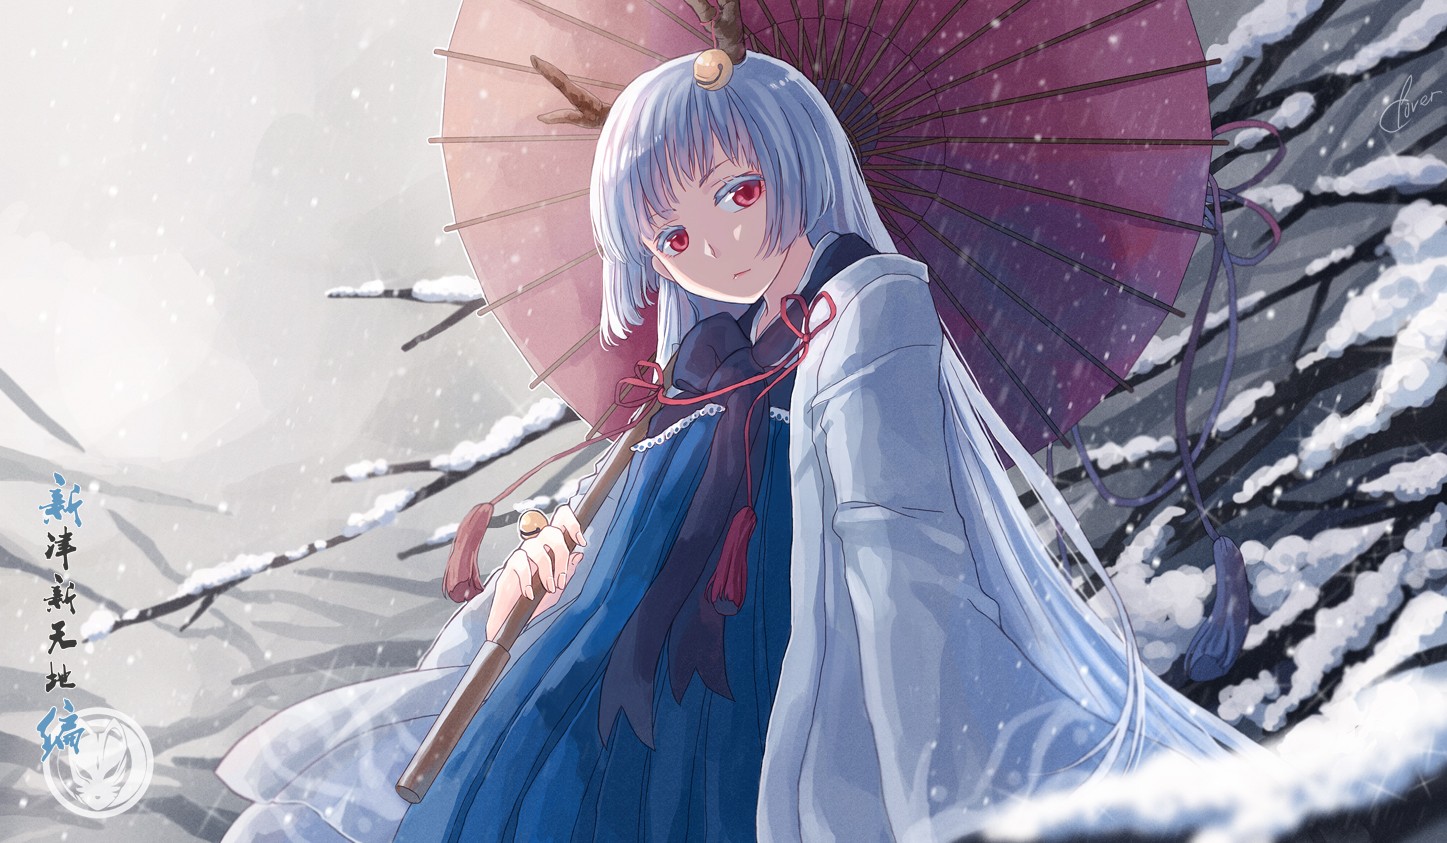 Anime 1447x843 original characters long hair snow umbrella antlers Pixiv Fantasia red eyes women with umbrella sad anime anime girls fantasy art fantasy girl